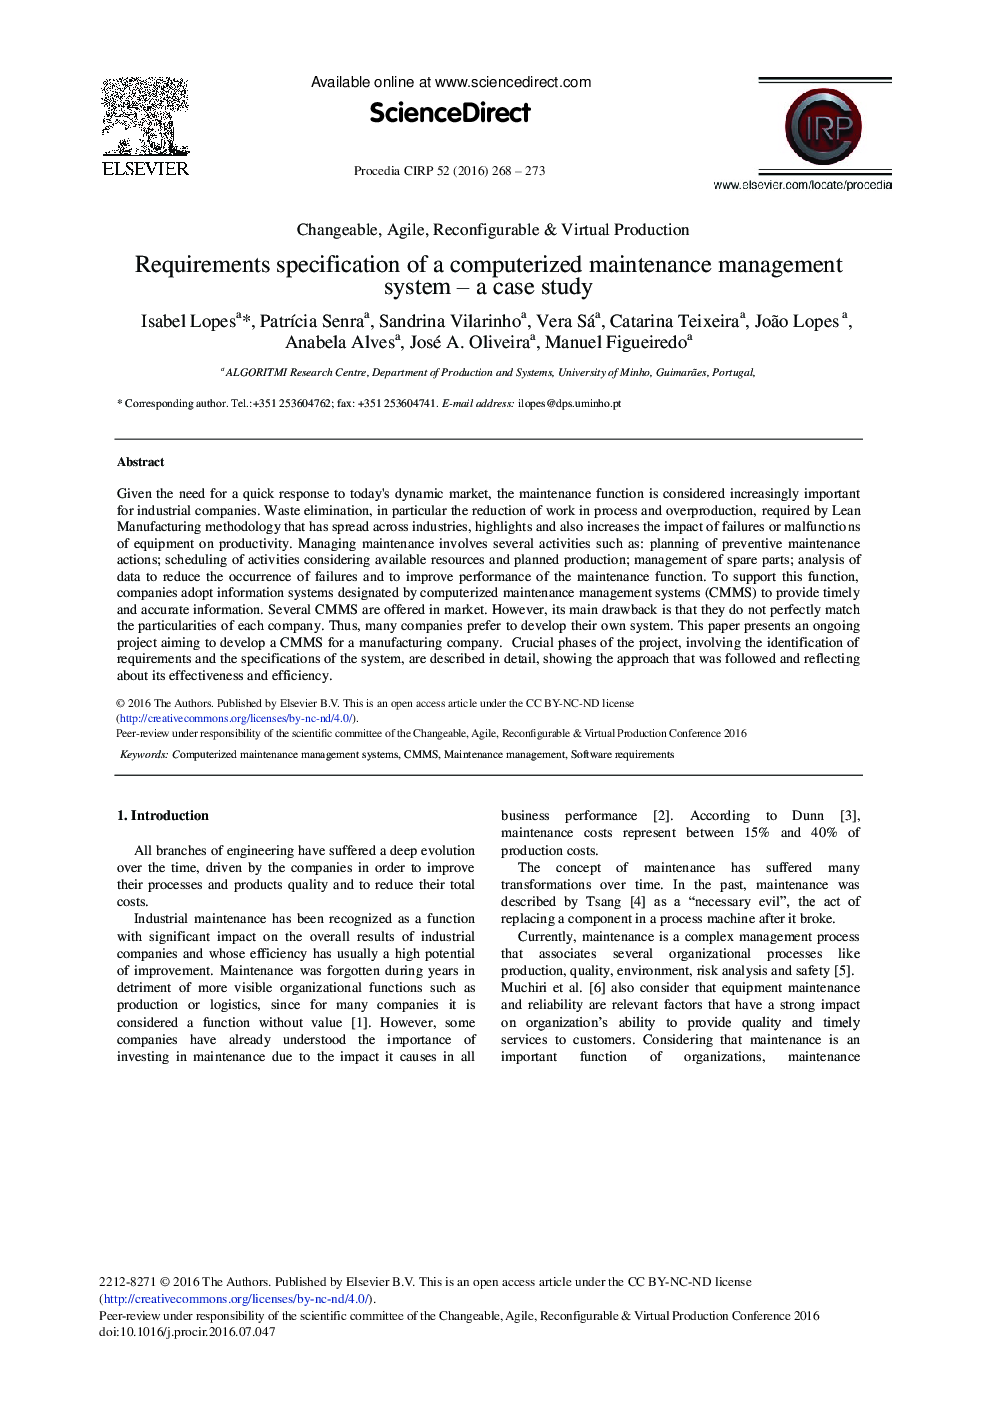 Requirements Specification of a Computerized Maintenance Management System – A Case Study 